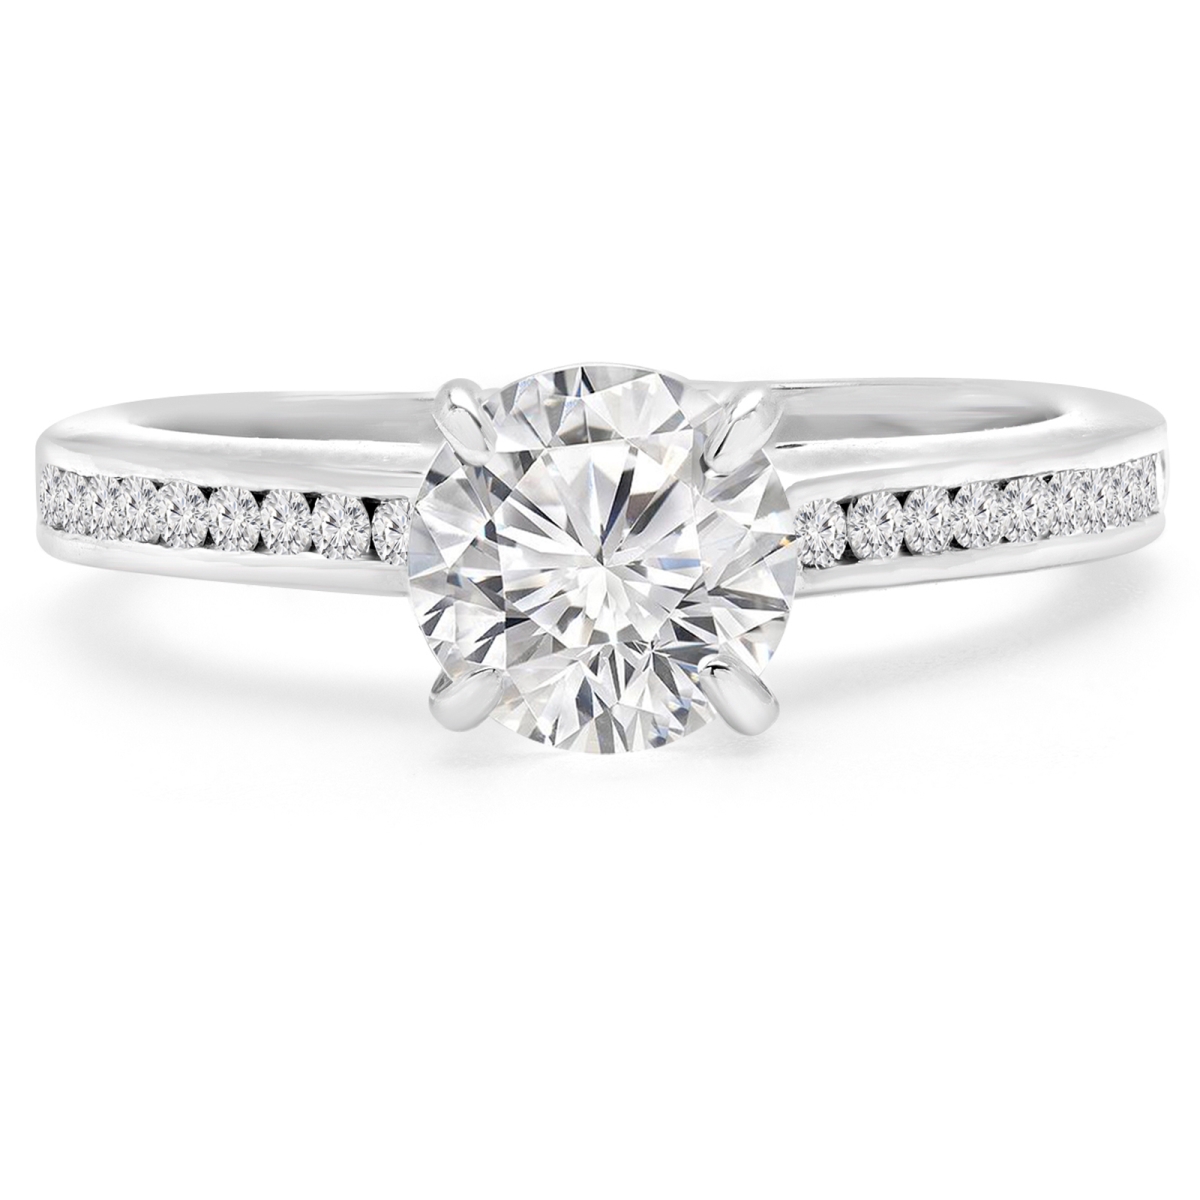 1.2 CTW Round Diamond Solitaire Engagement Ring with Channel Set Accents in 14K White Gold - Size 3.5 -  Great Gems, GR3066380